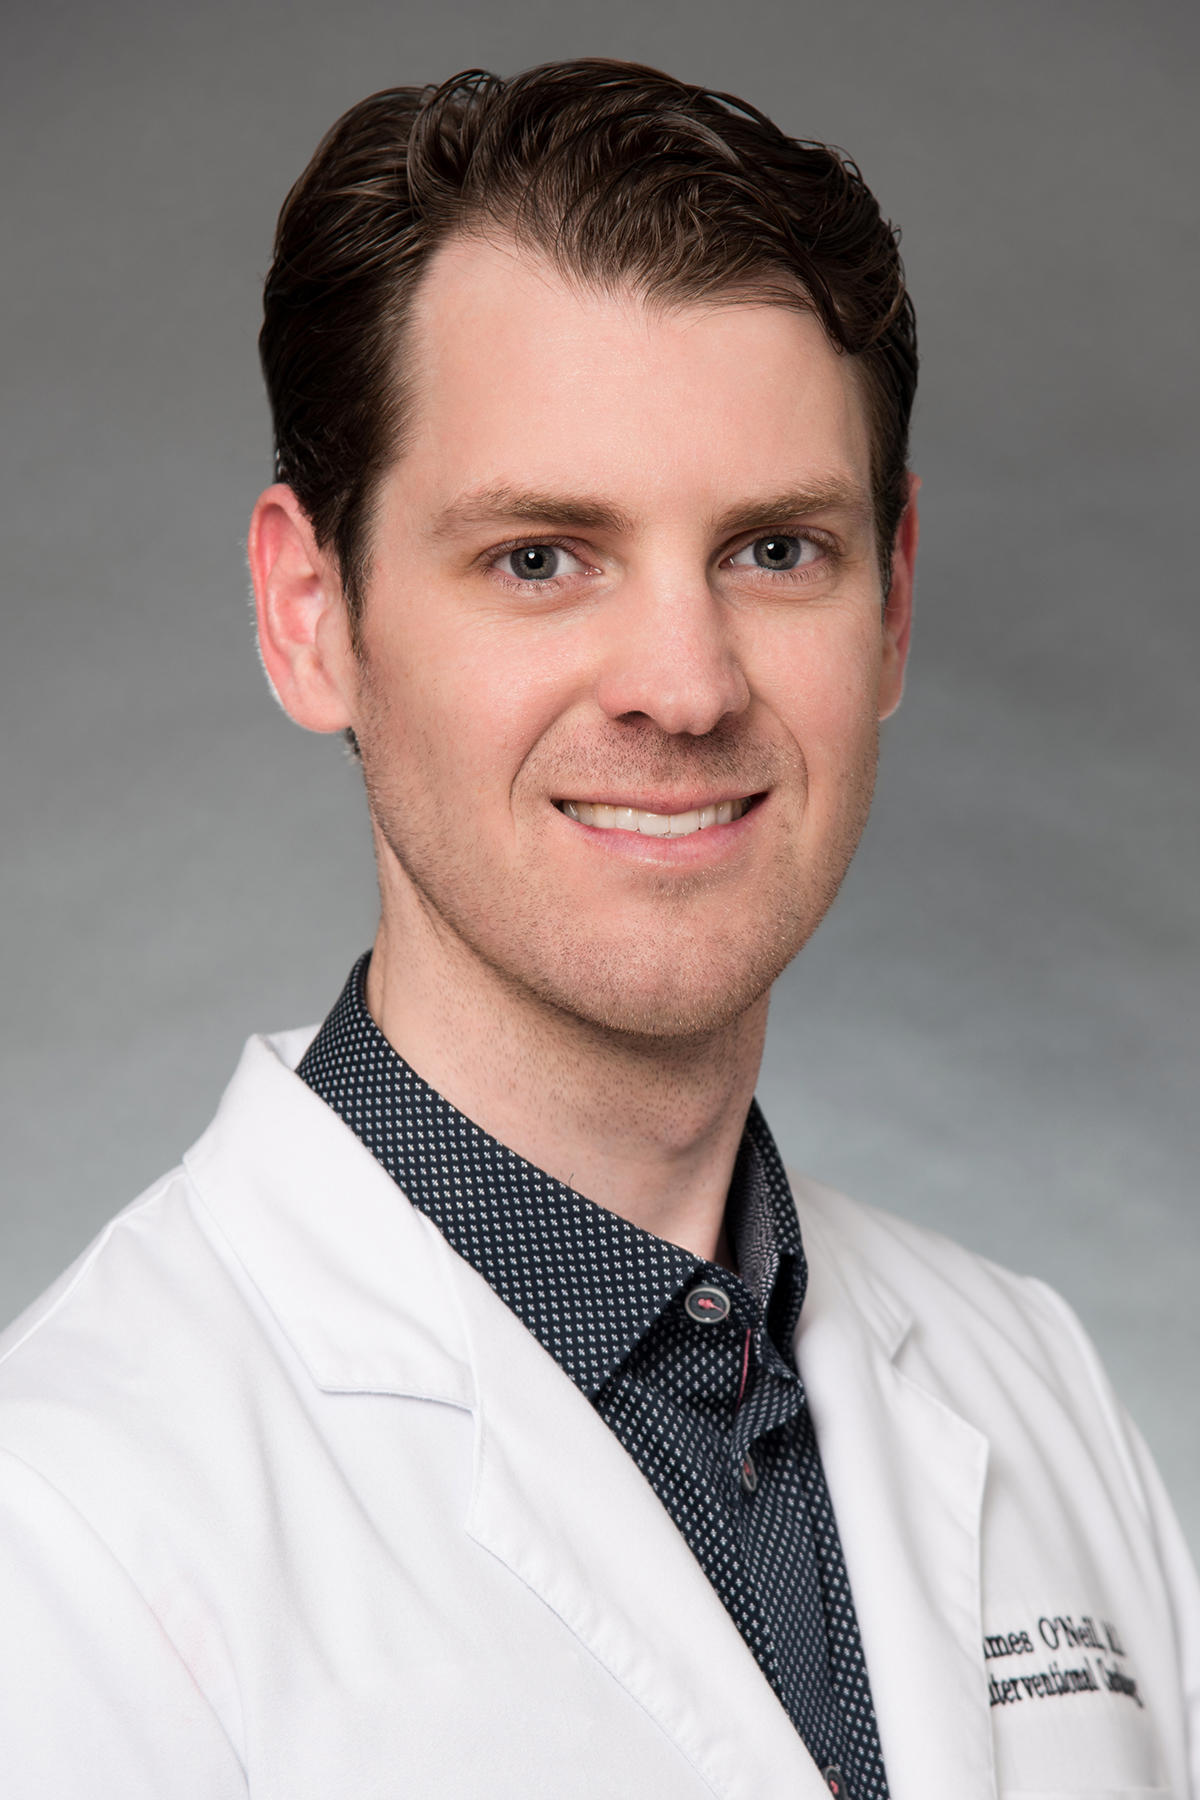 Dr. James O'neill, MD - Houston, TX - Cardiologist